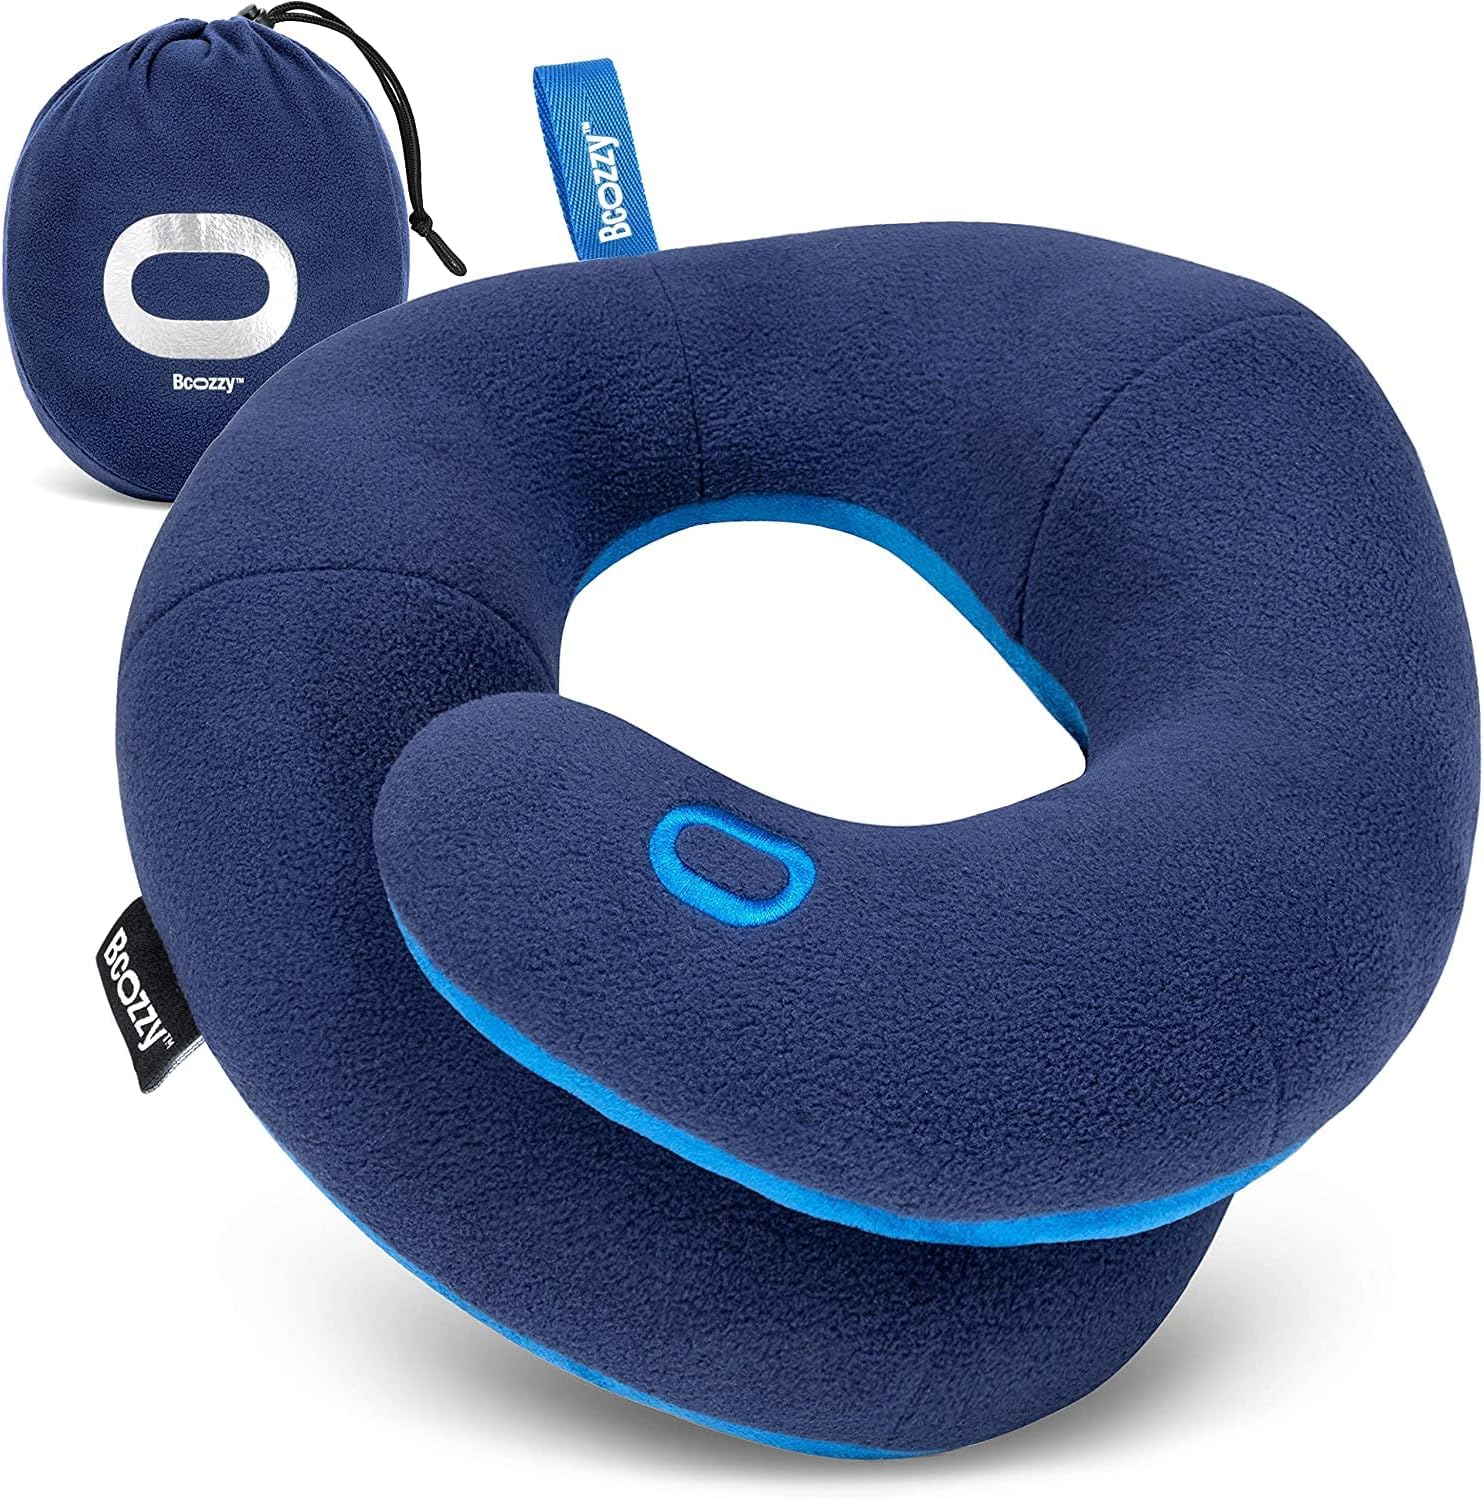 making travel easy with kids neck pillow